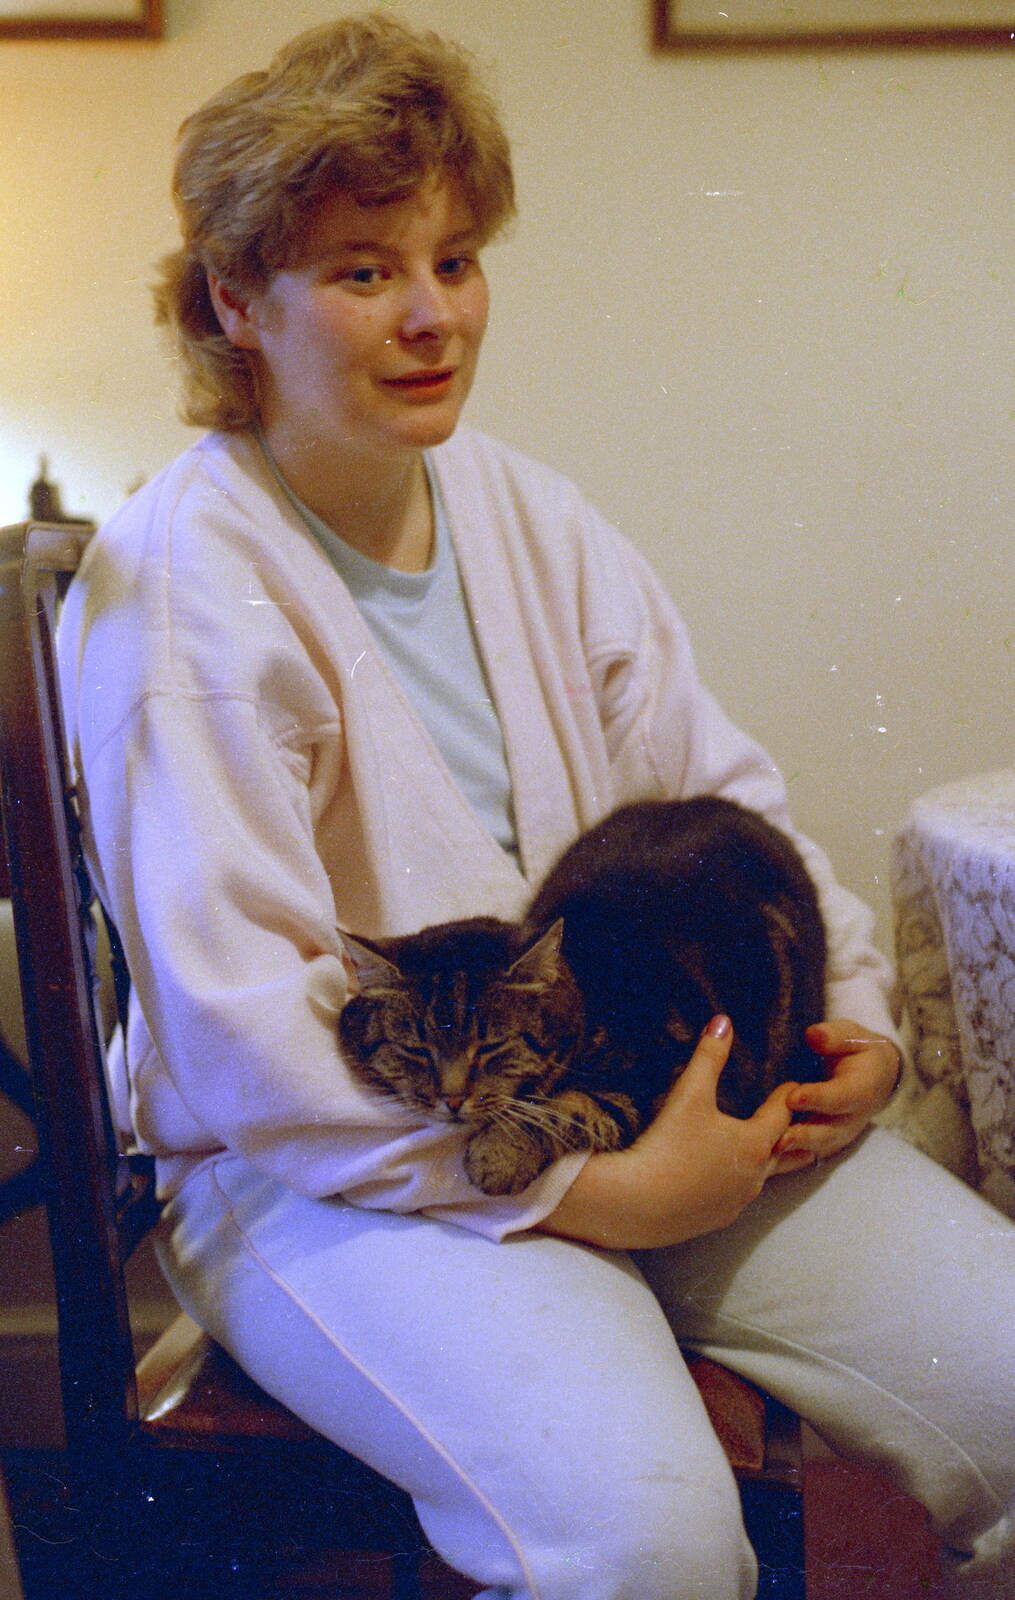 Anna with Florence from The Last Day of Term, and Leaving New Milton, Hampshire - 18th September 1985